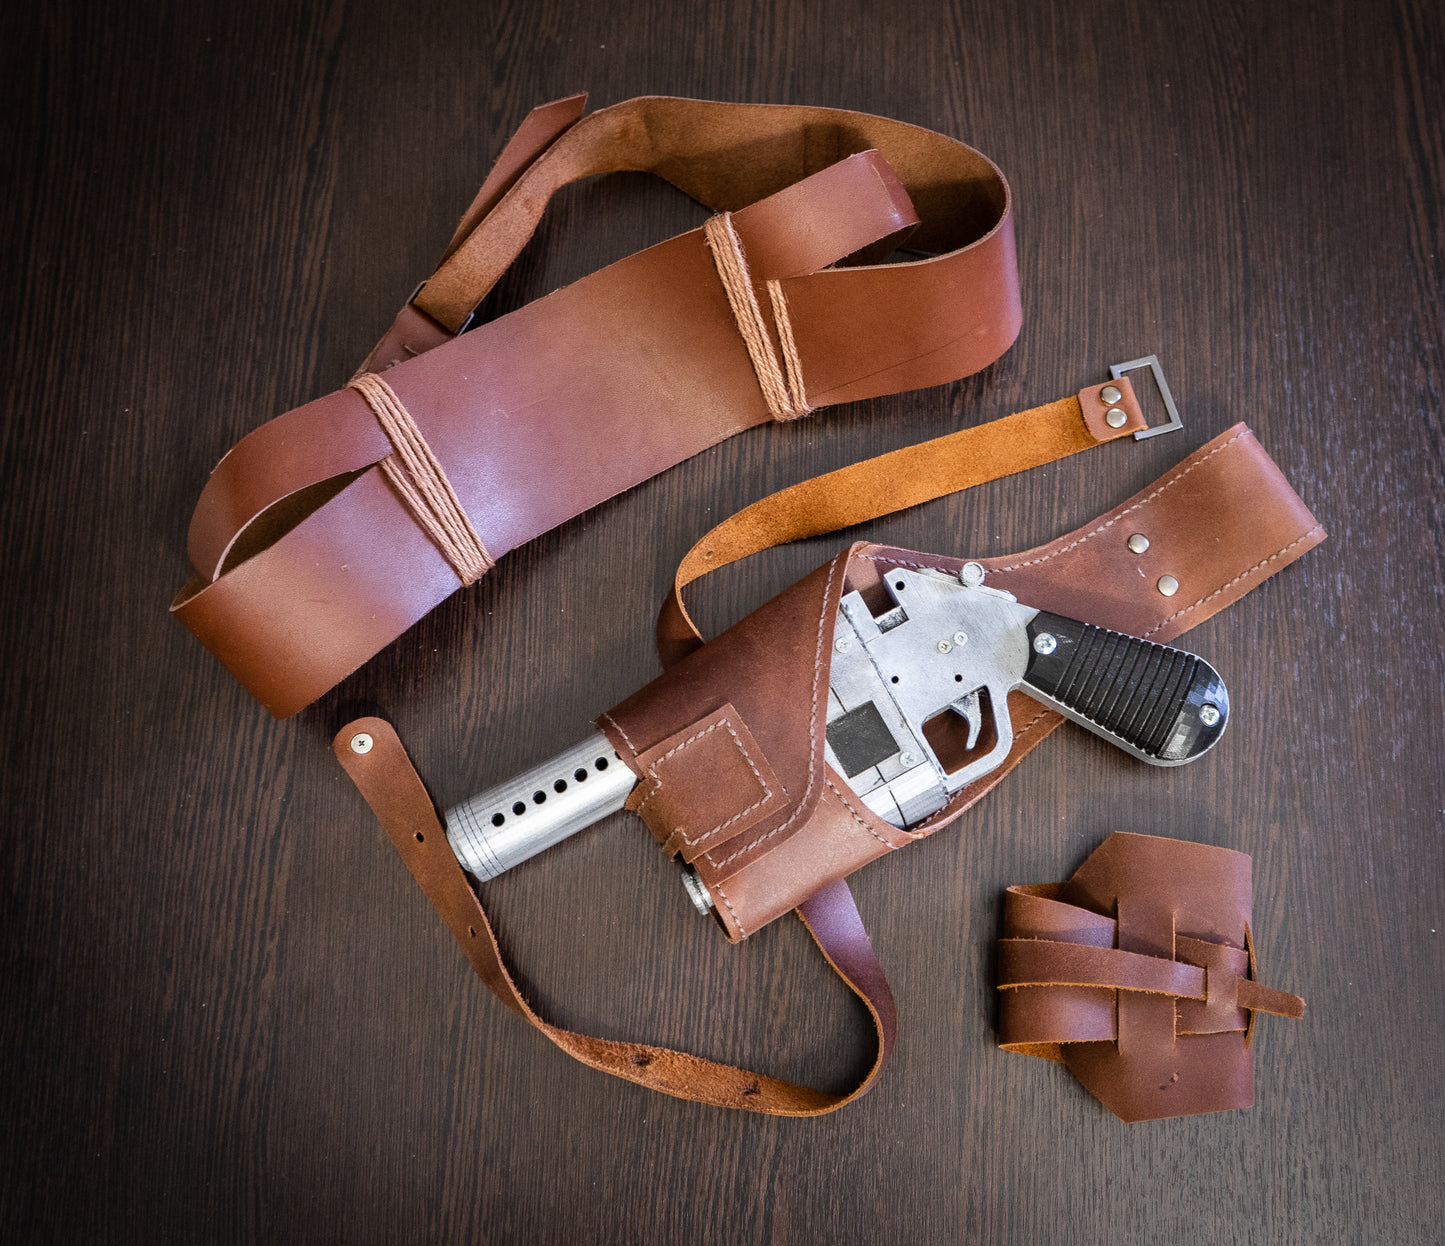 Rey Accessory - Belt, Wrist cuff, and Holster | Star Wars Cosplay